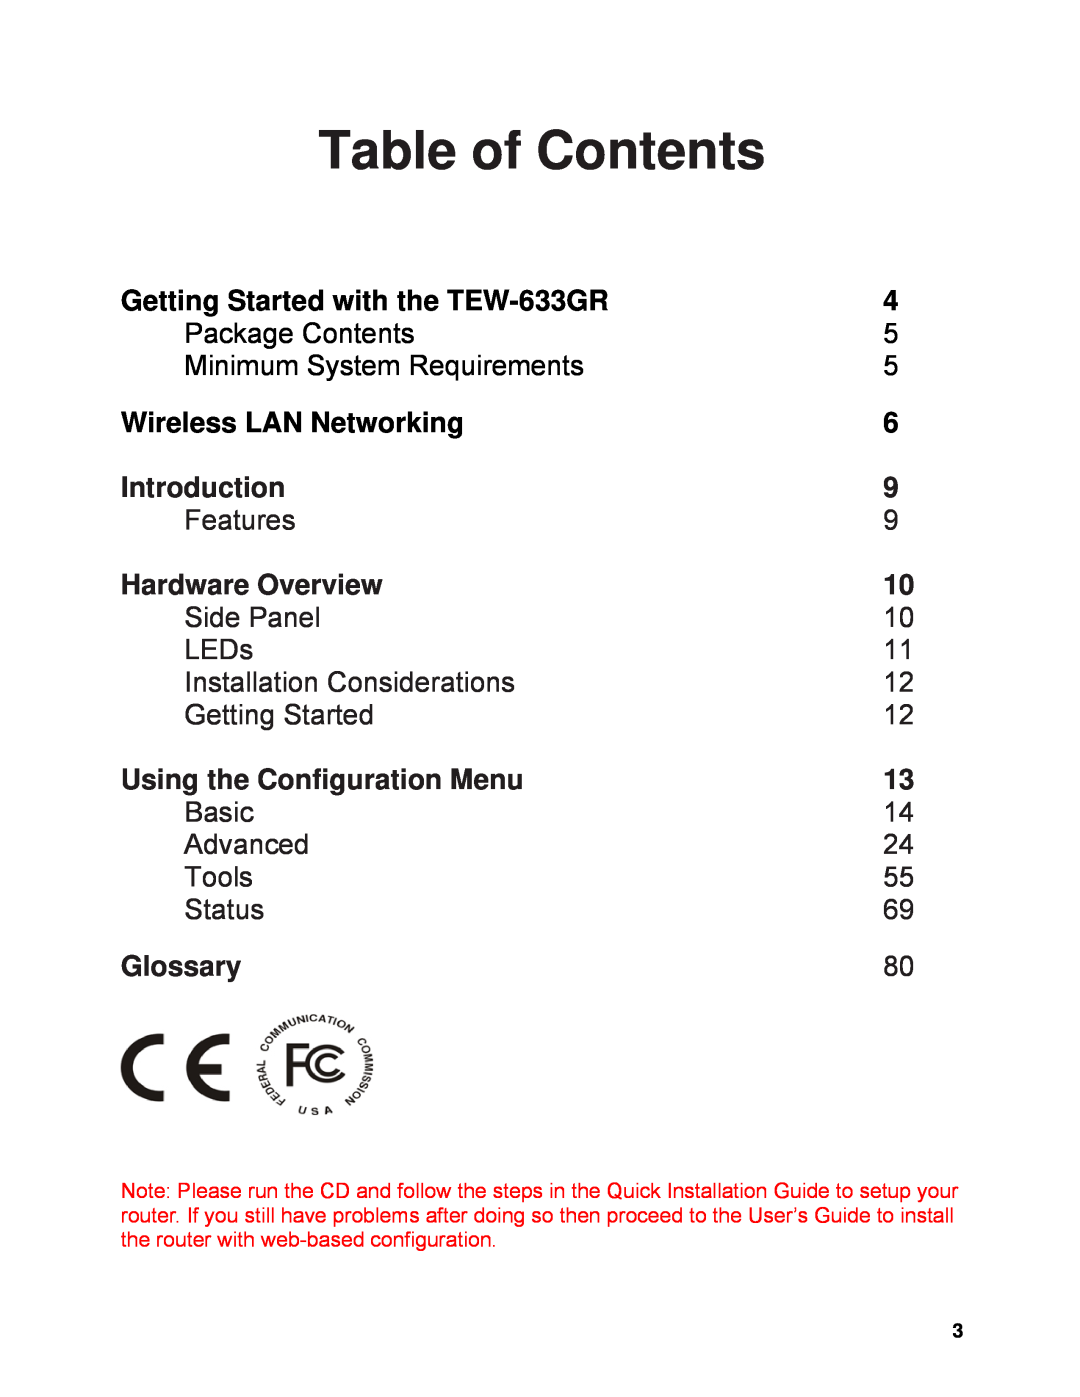 TRENDnet manual Getting Started with the TEW-633GR, Wireless LAN Networking, Introduction, Hardware Overview, Glossary 